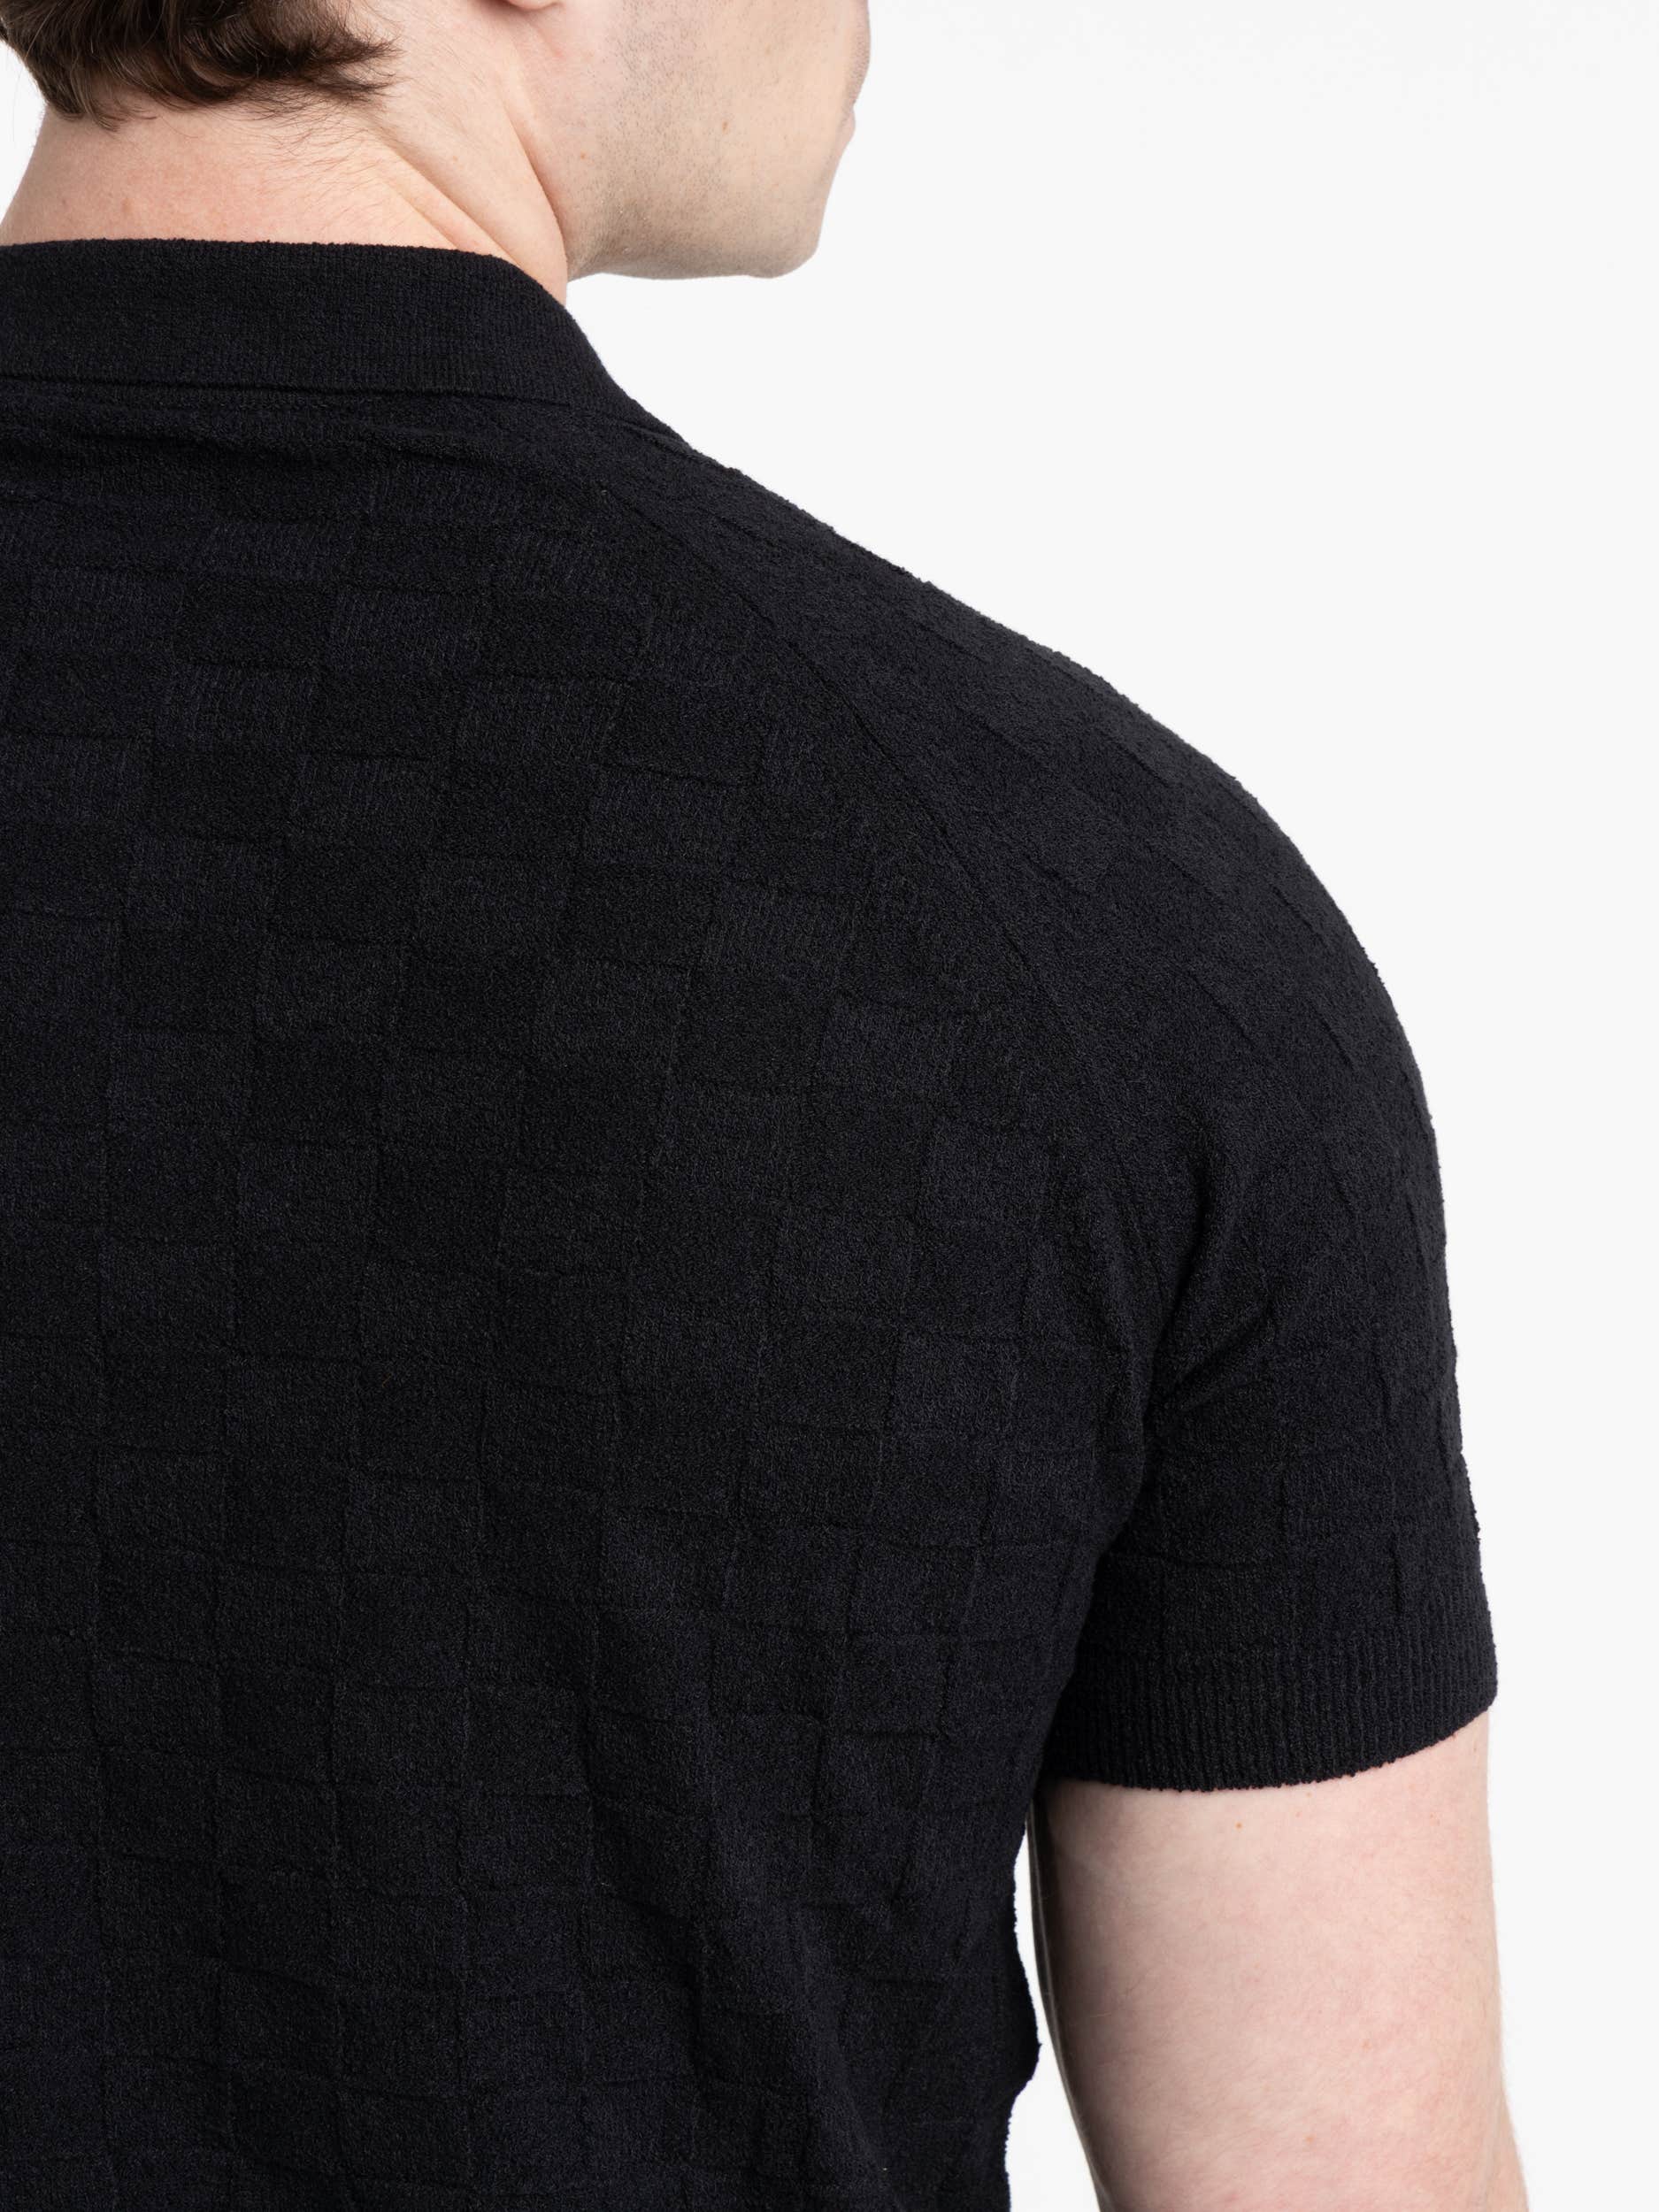 Black Terry Towel Checkered Polo Knit